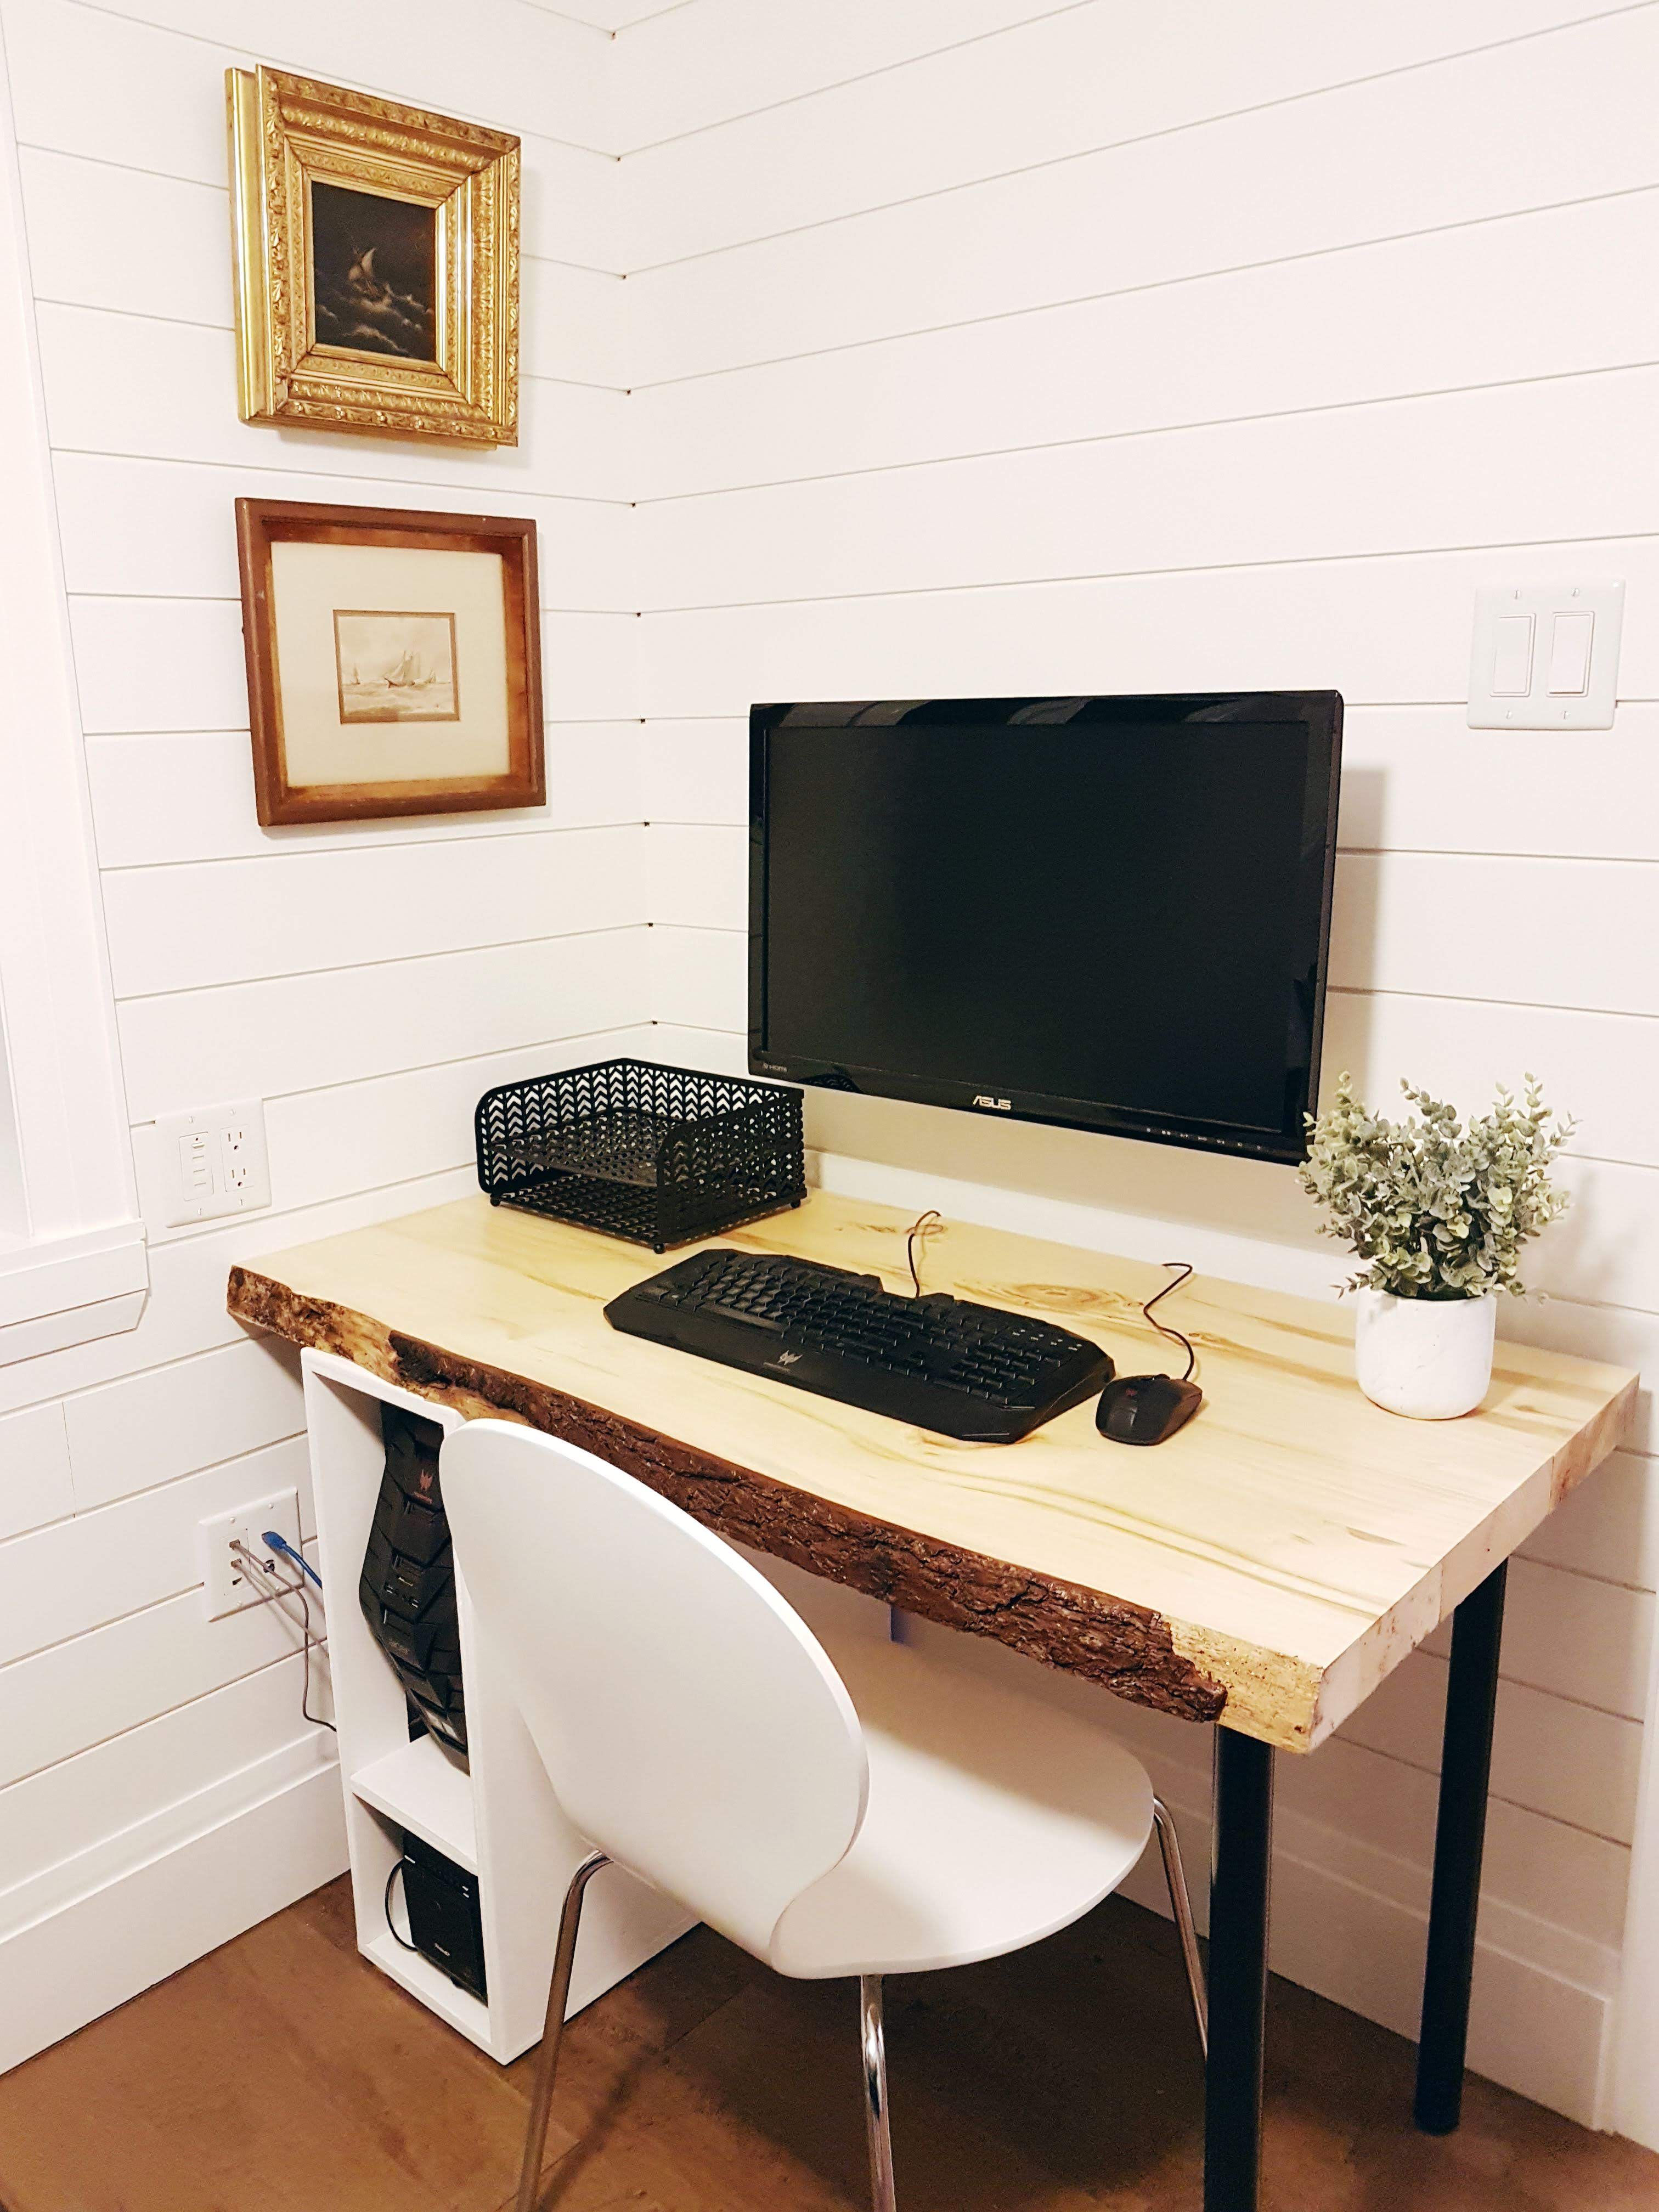 How to Hide Cords on a Desk: 15 Ideas